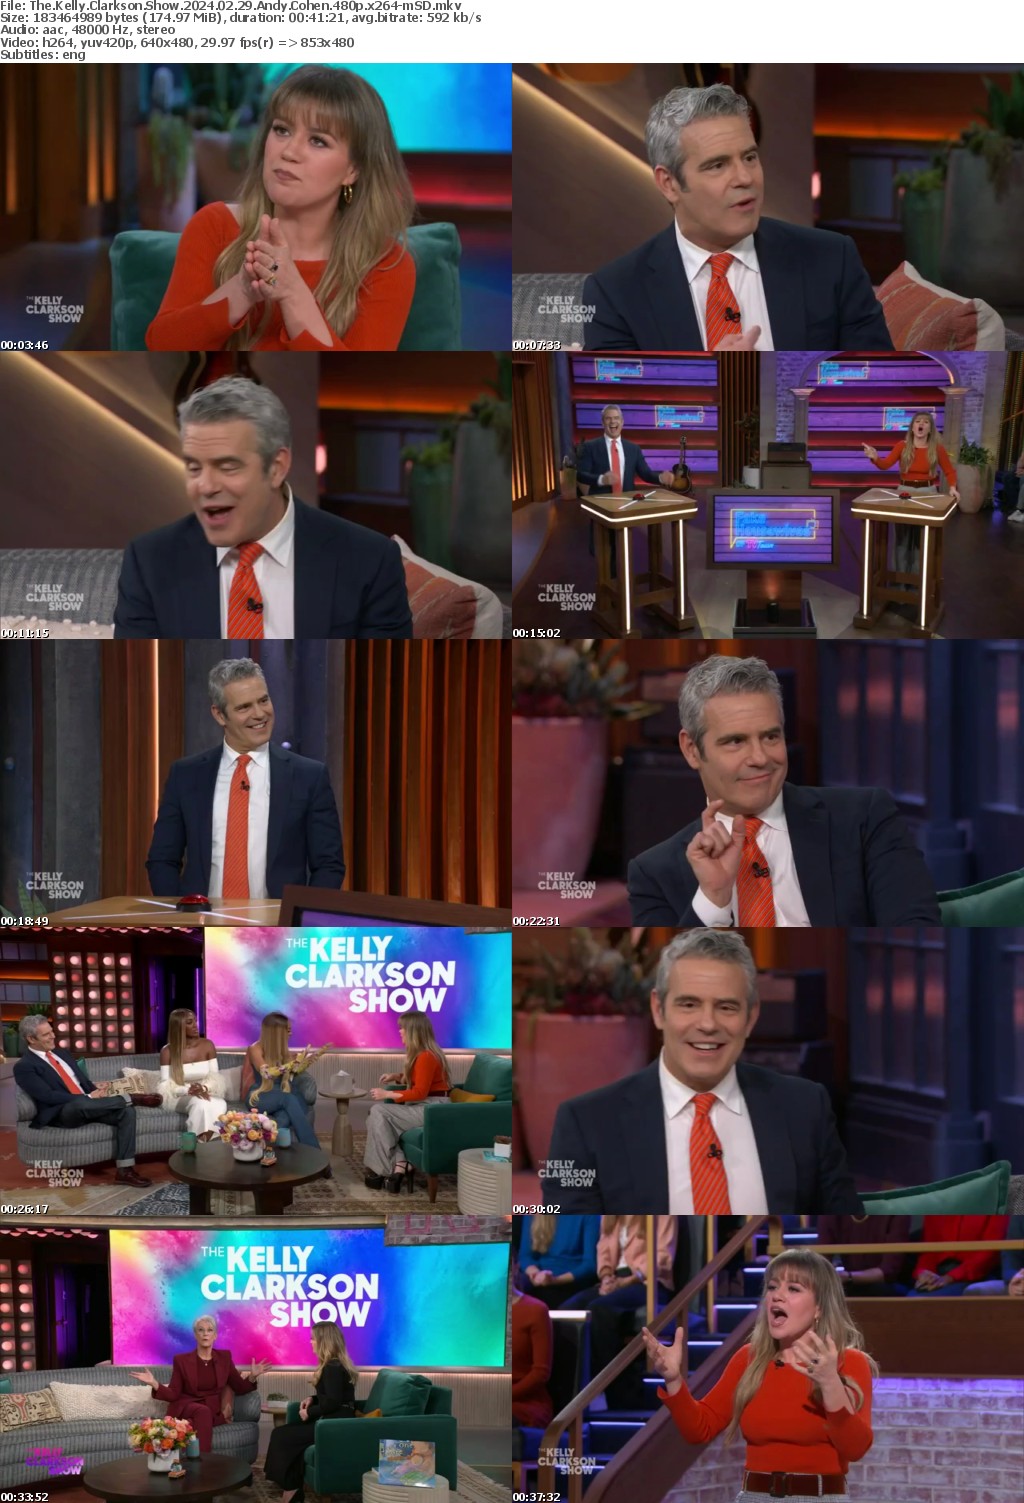 The Kelly Clarkson Show 2024 02 29 Andy Cohen 480p x264-mSD